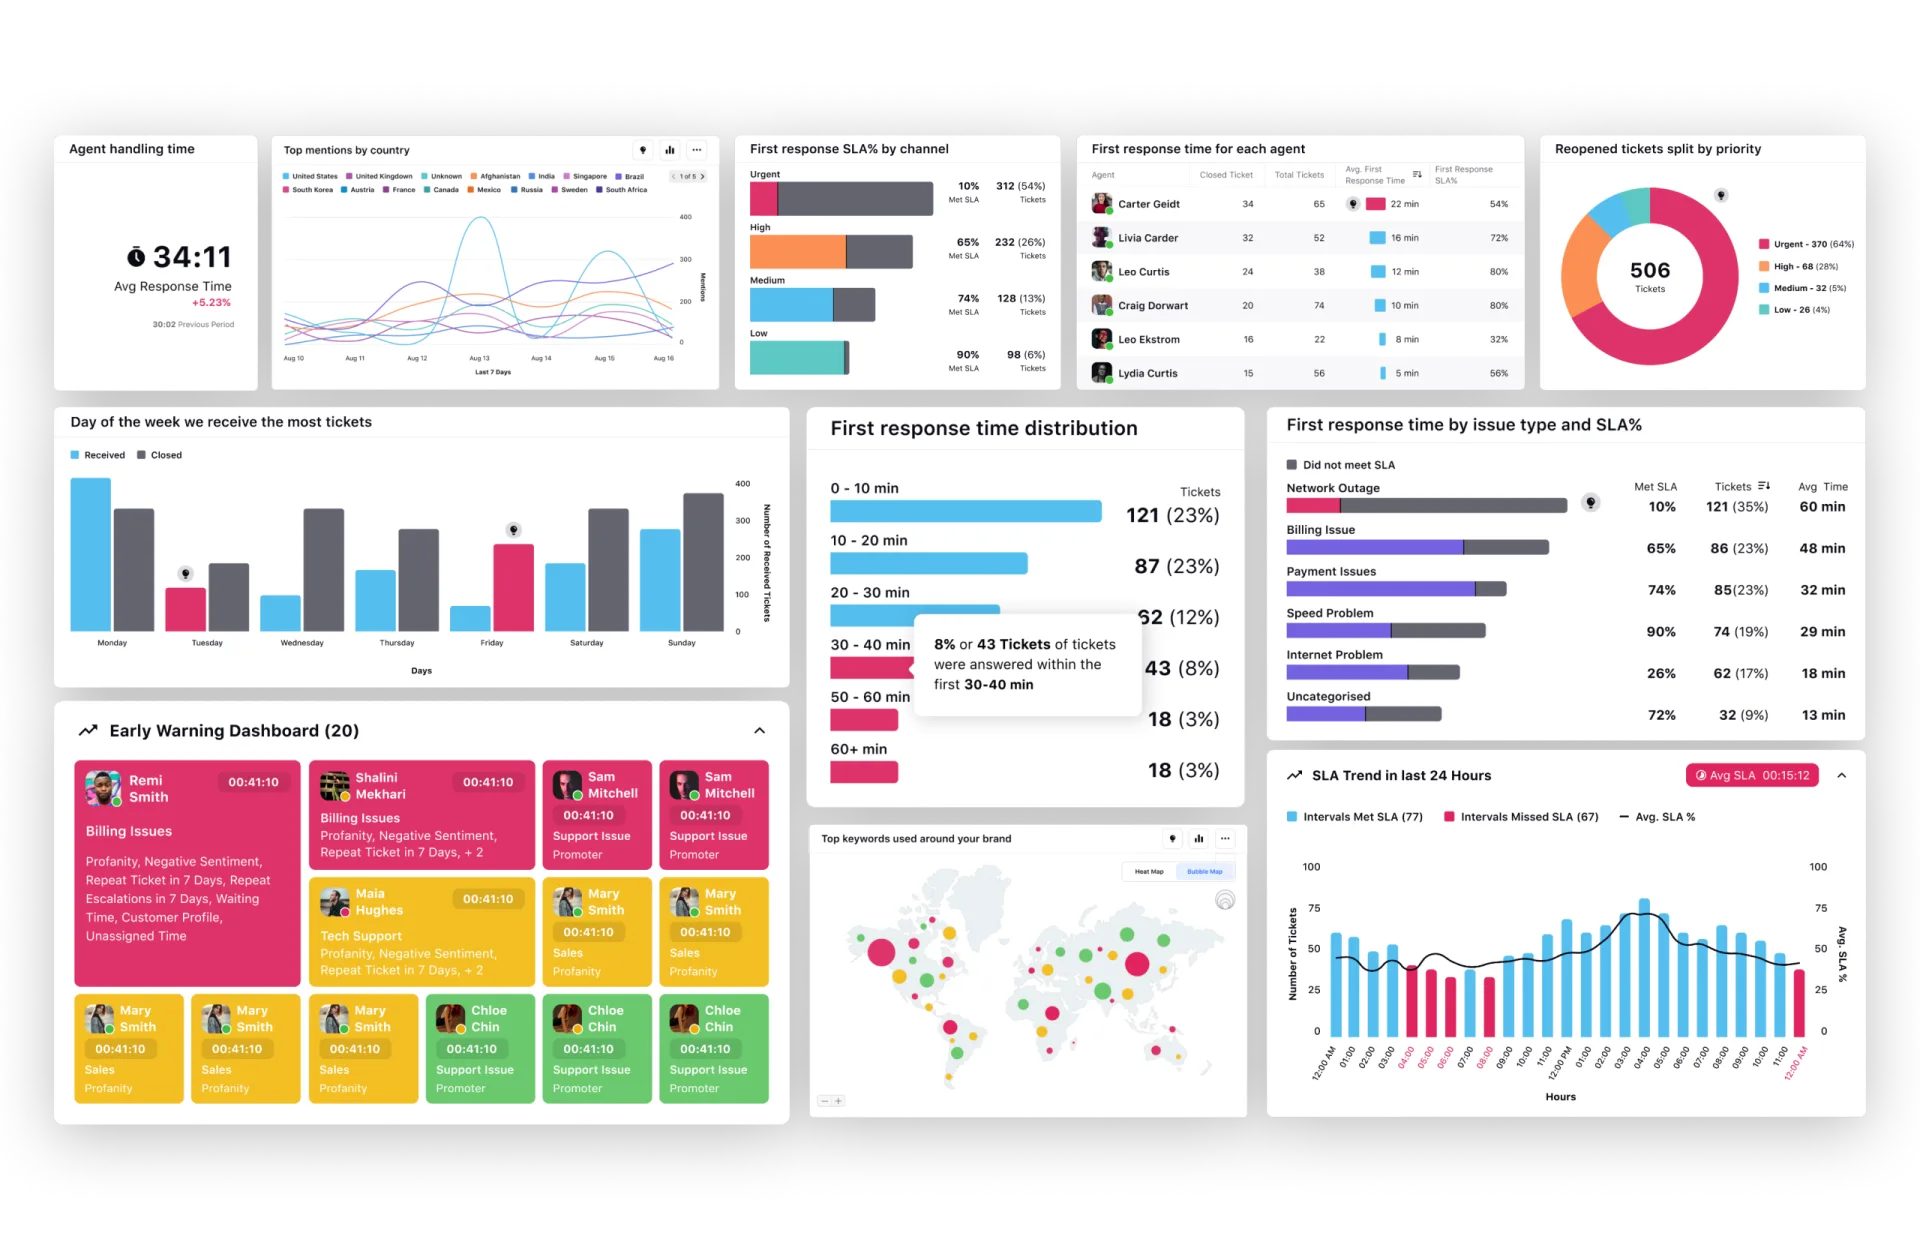 Sprinklr's highly customizable dashboards help you visualize data with colorful, dynamic widgets